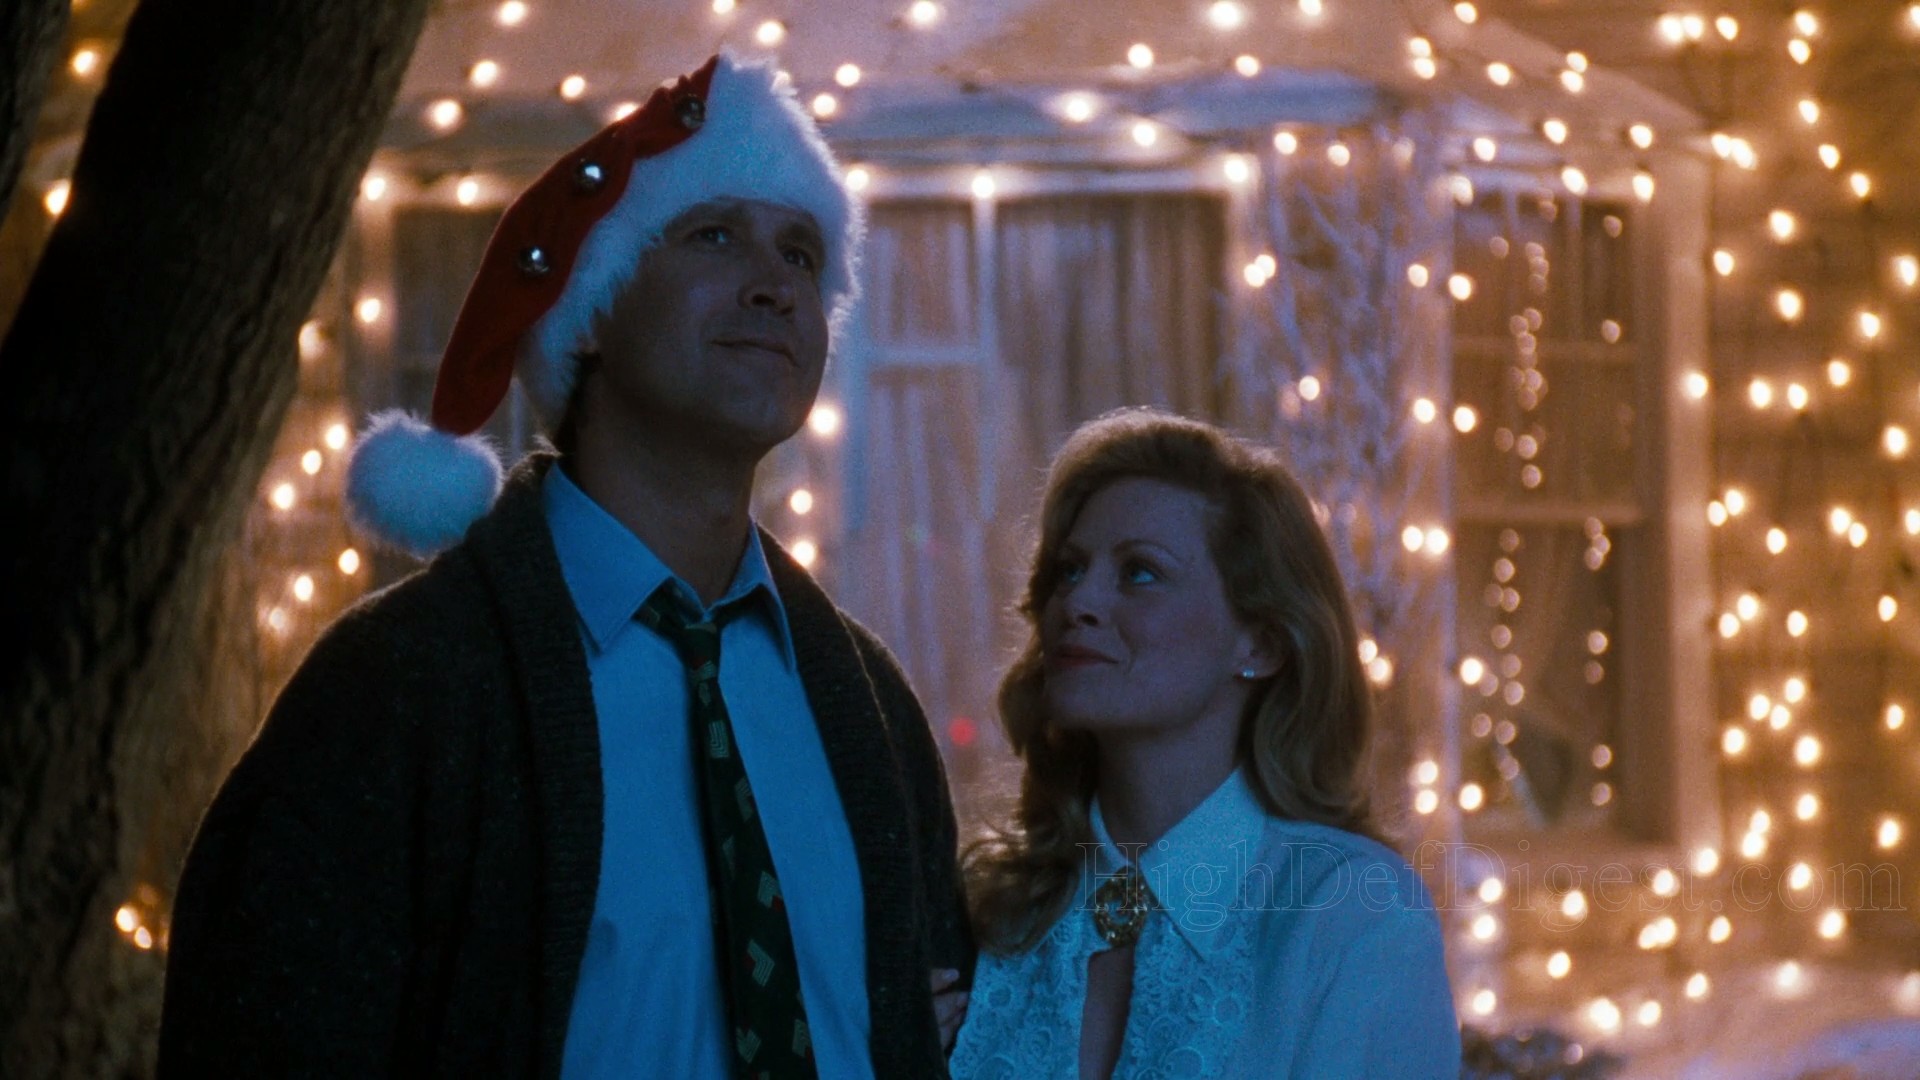 1920x1080 Over the years, 'National Lampoon's Christmas Vacation' has amassed a  strong following to become a modern holiday classic and a traditional watch  for the ...